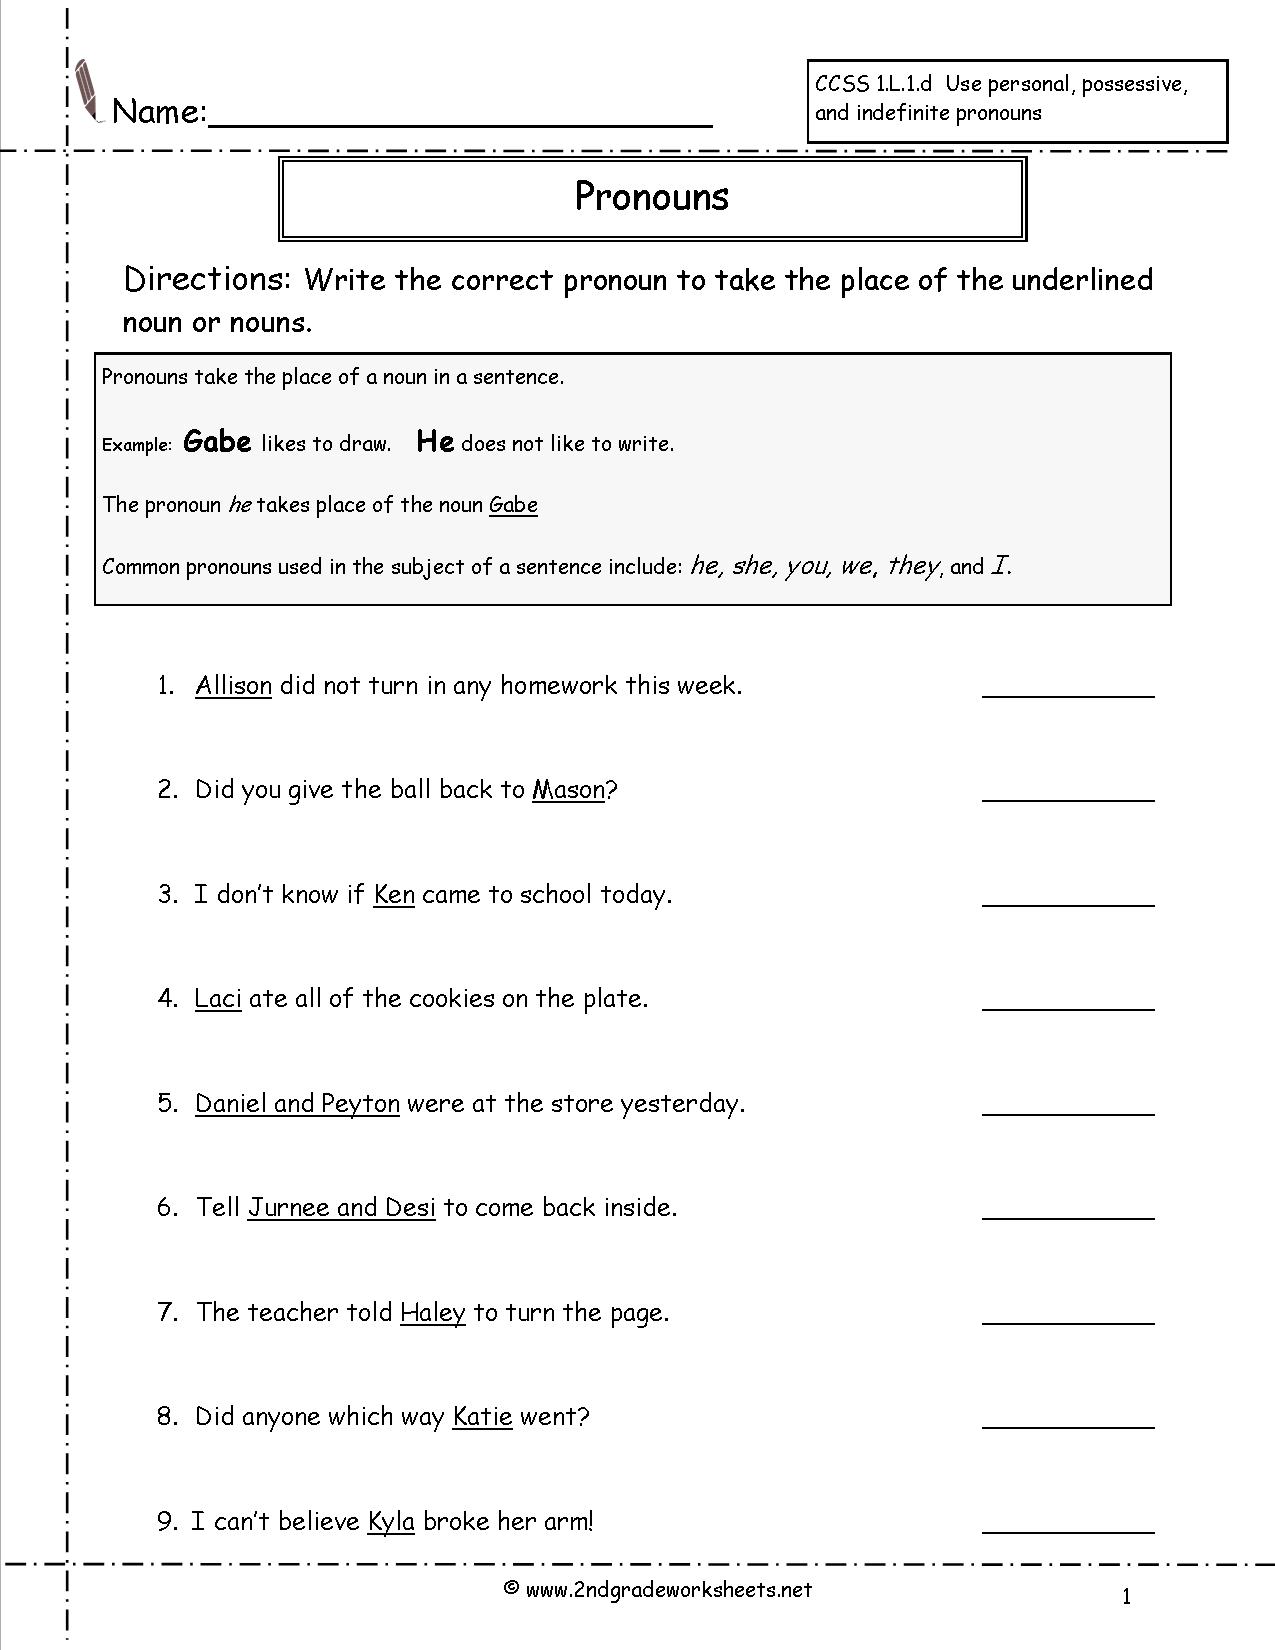 Reflexive Pronouns Worksheet with Questions